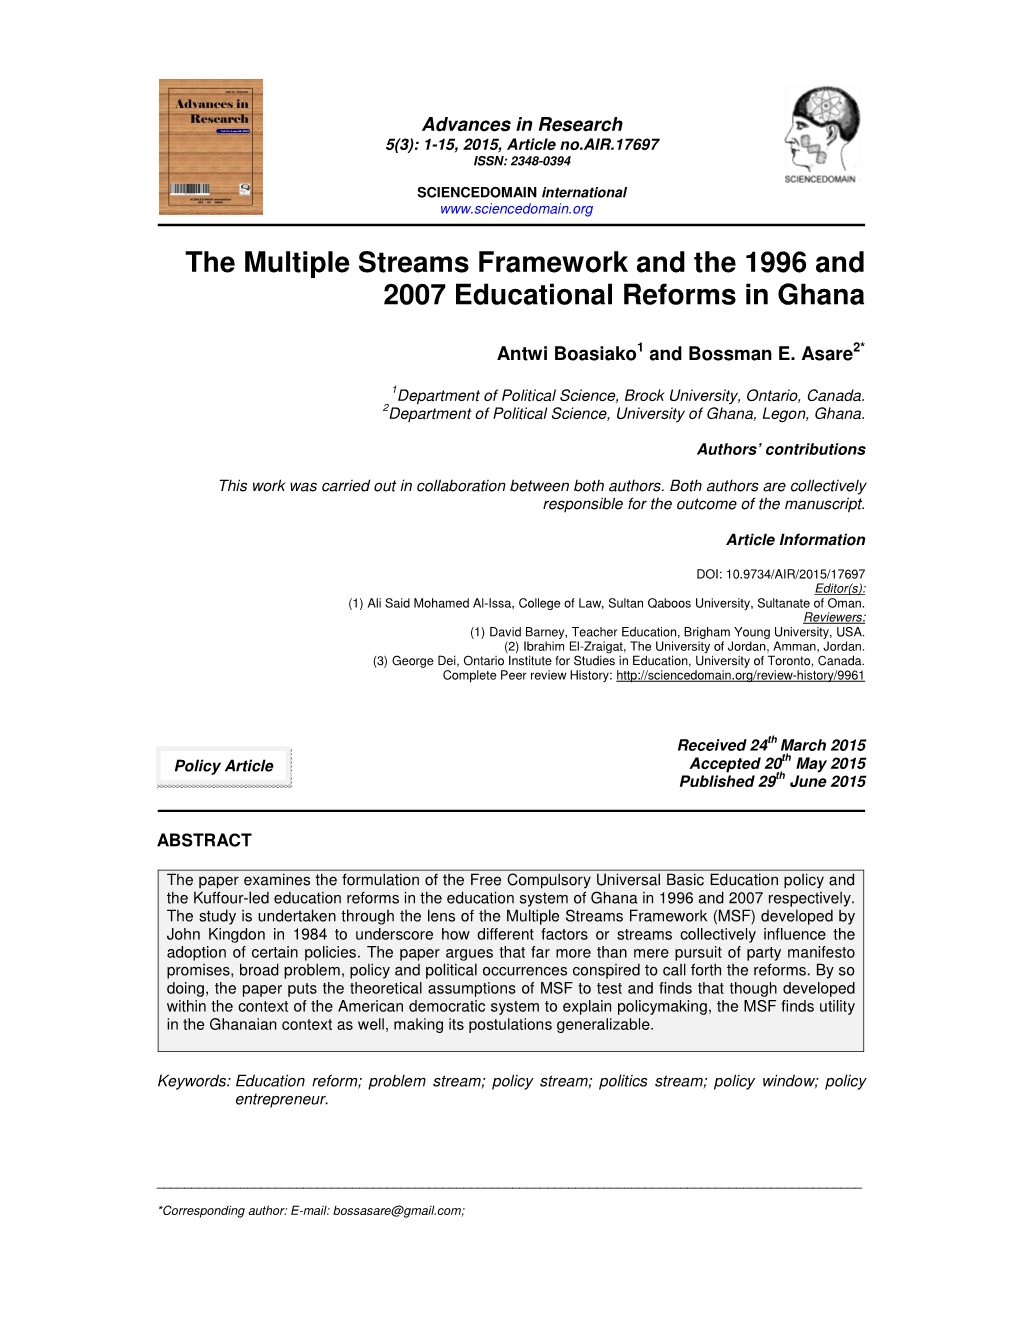 The Multiple Streams Framework and the 1996 and 2007 Educational Reforms in Ghana